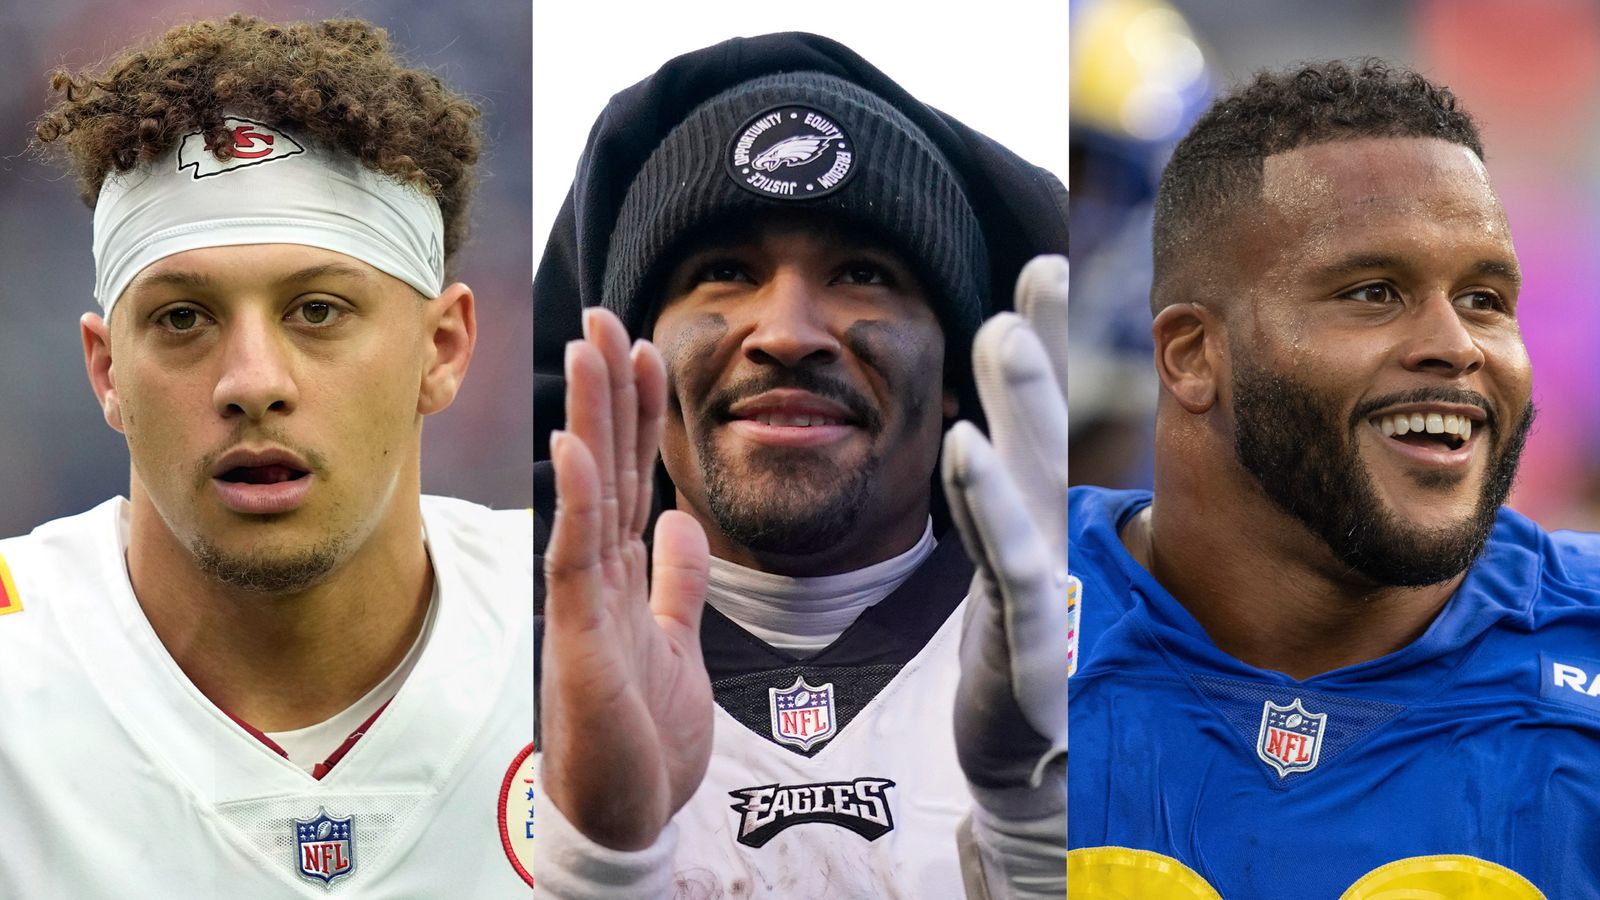 Pro Bowl Jalen Hurts picked as NFLhigh eight Eagles players are